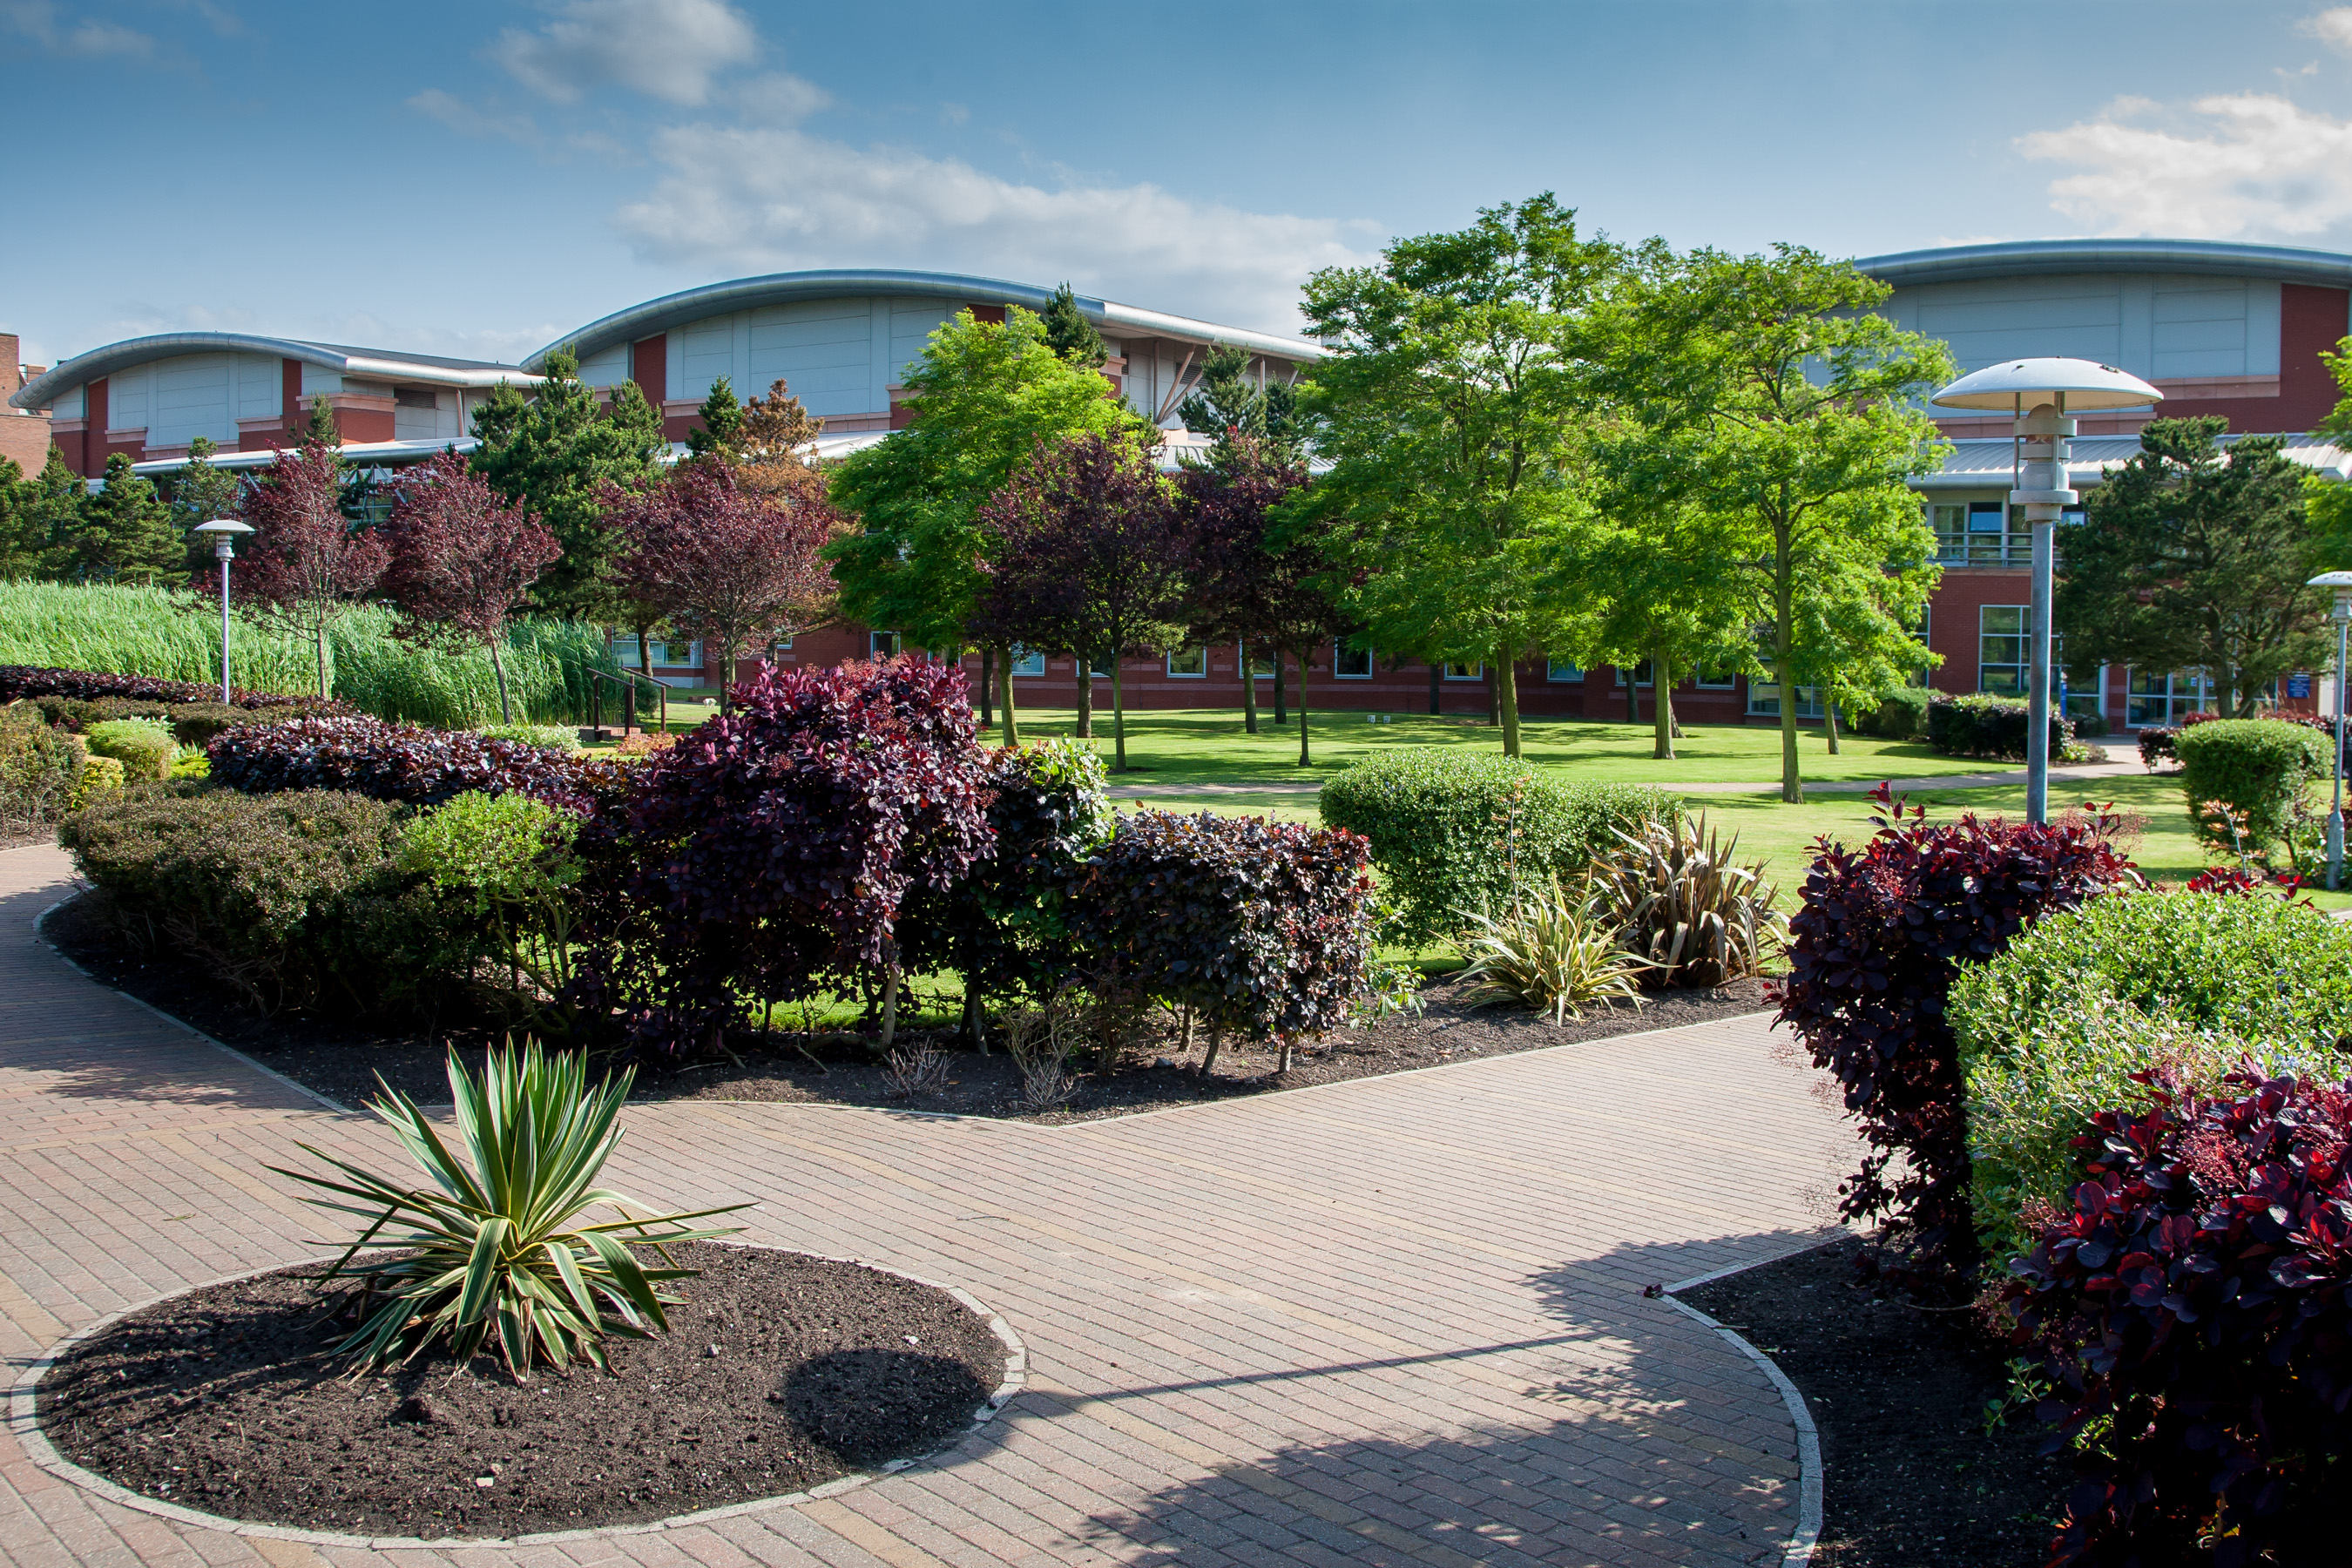 Exterior photograph of the landscaping at Thornton Science Park